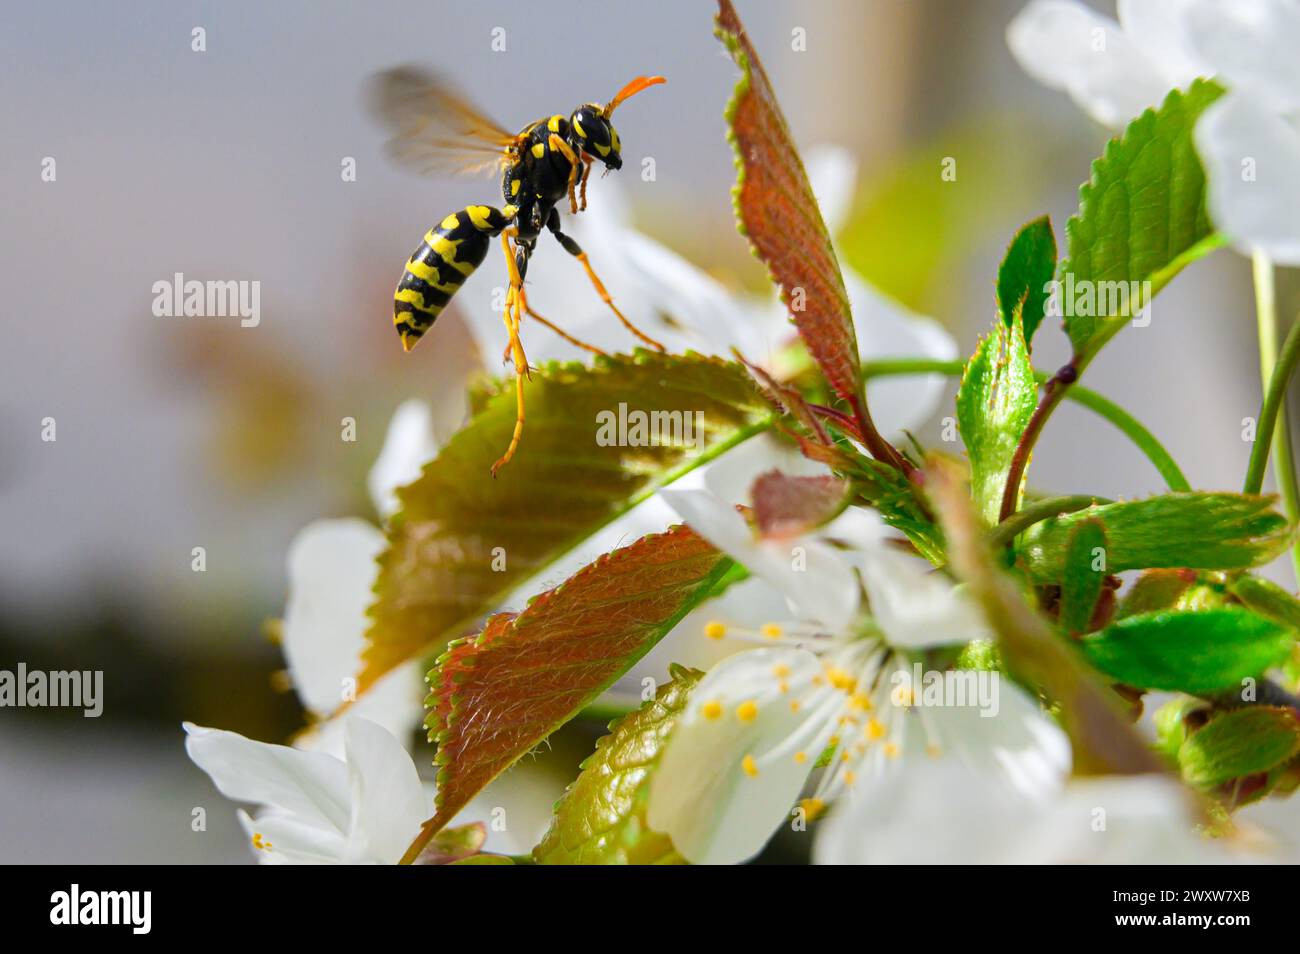 Wasp on a cherry blossom Stock Photo